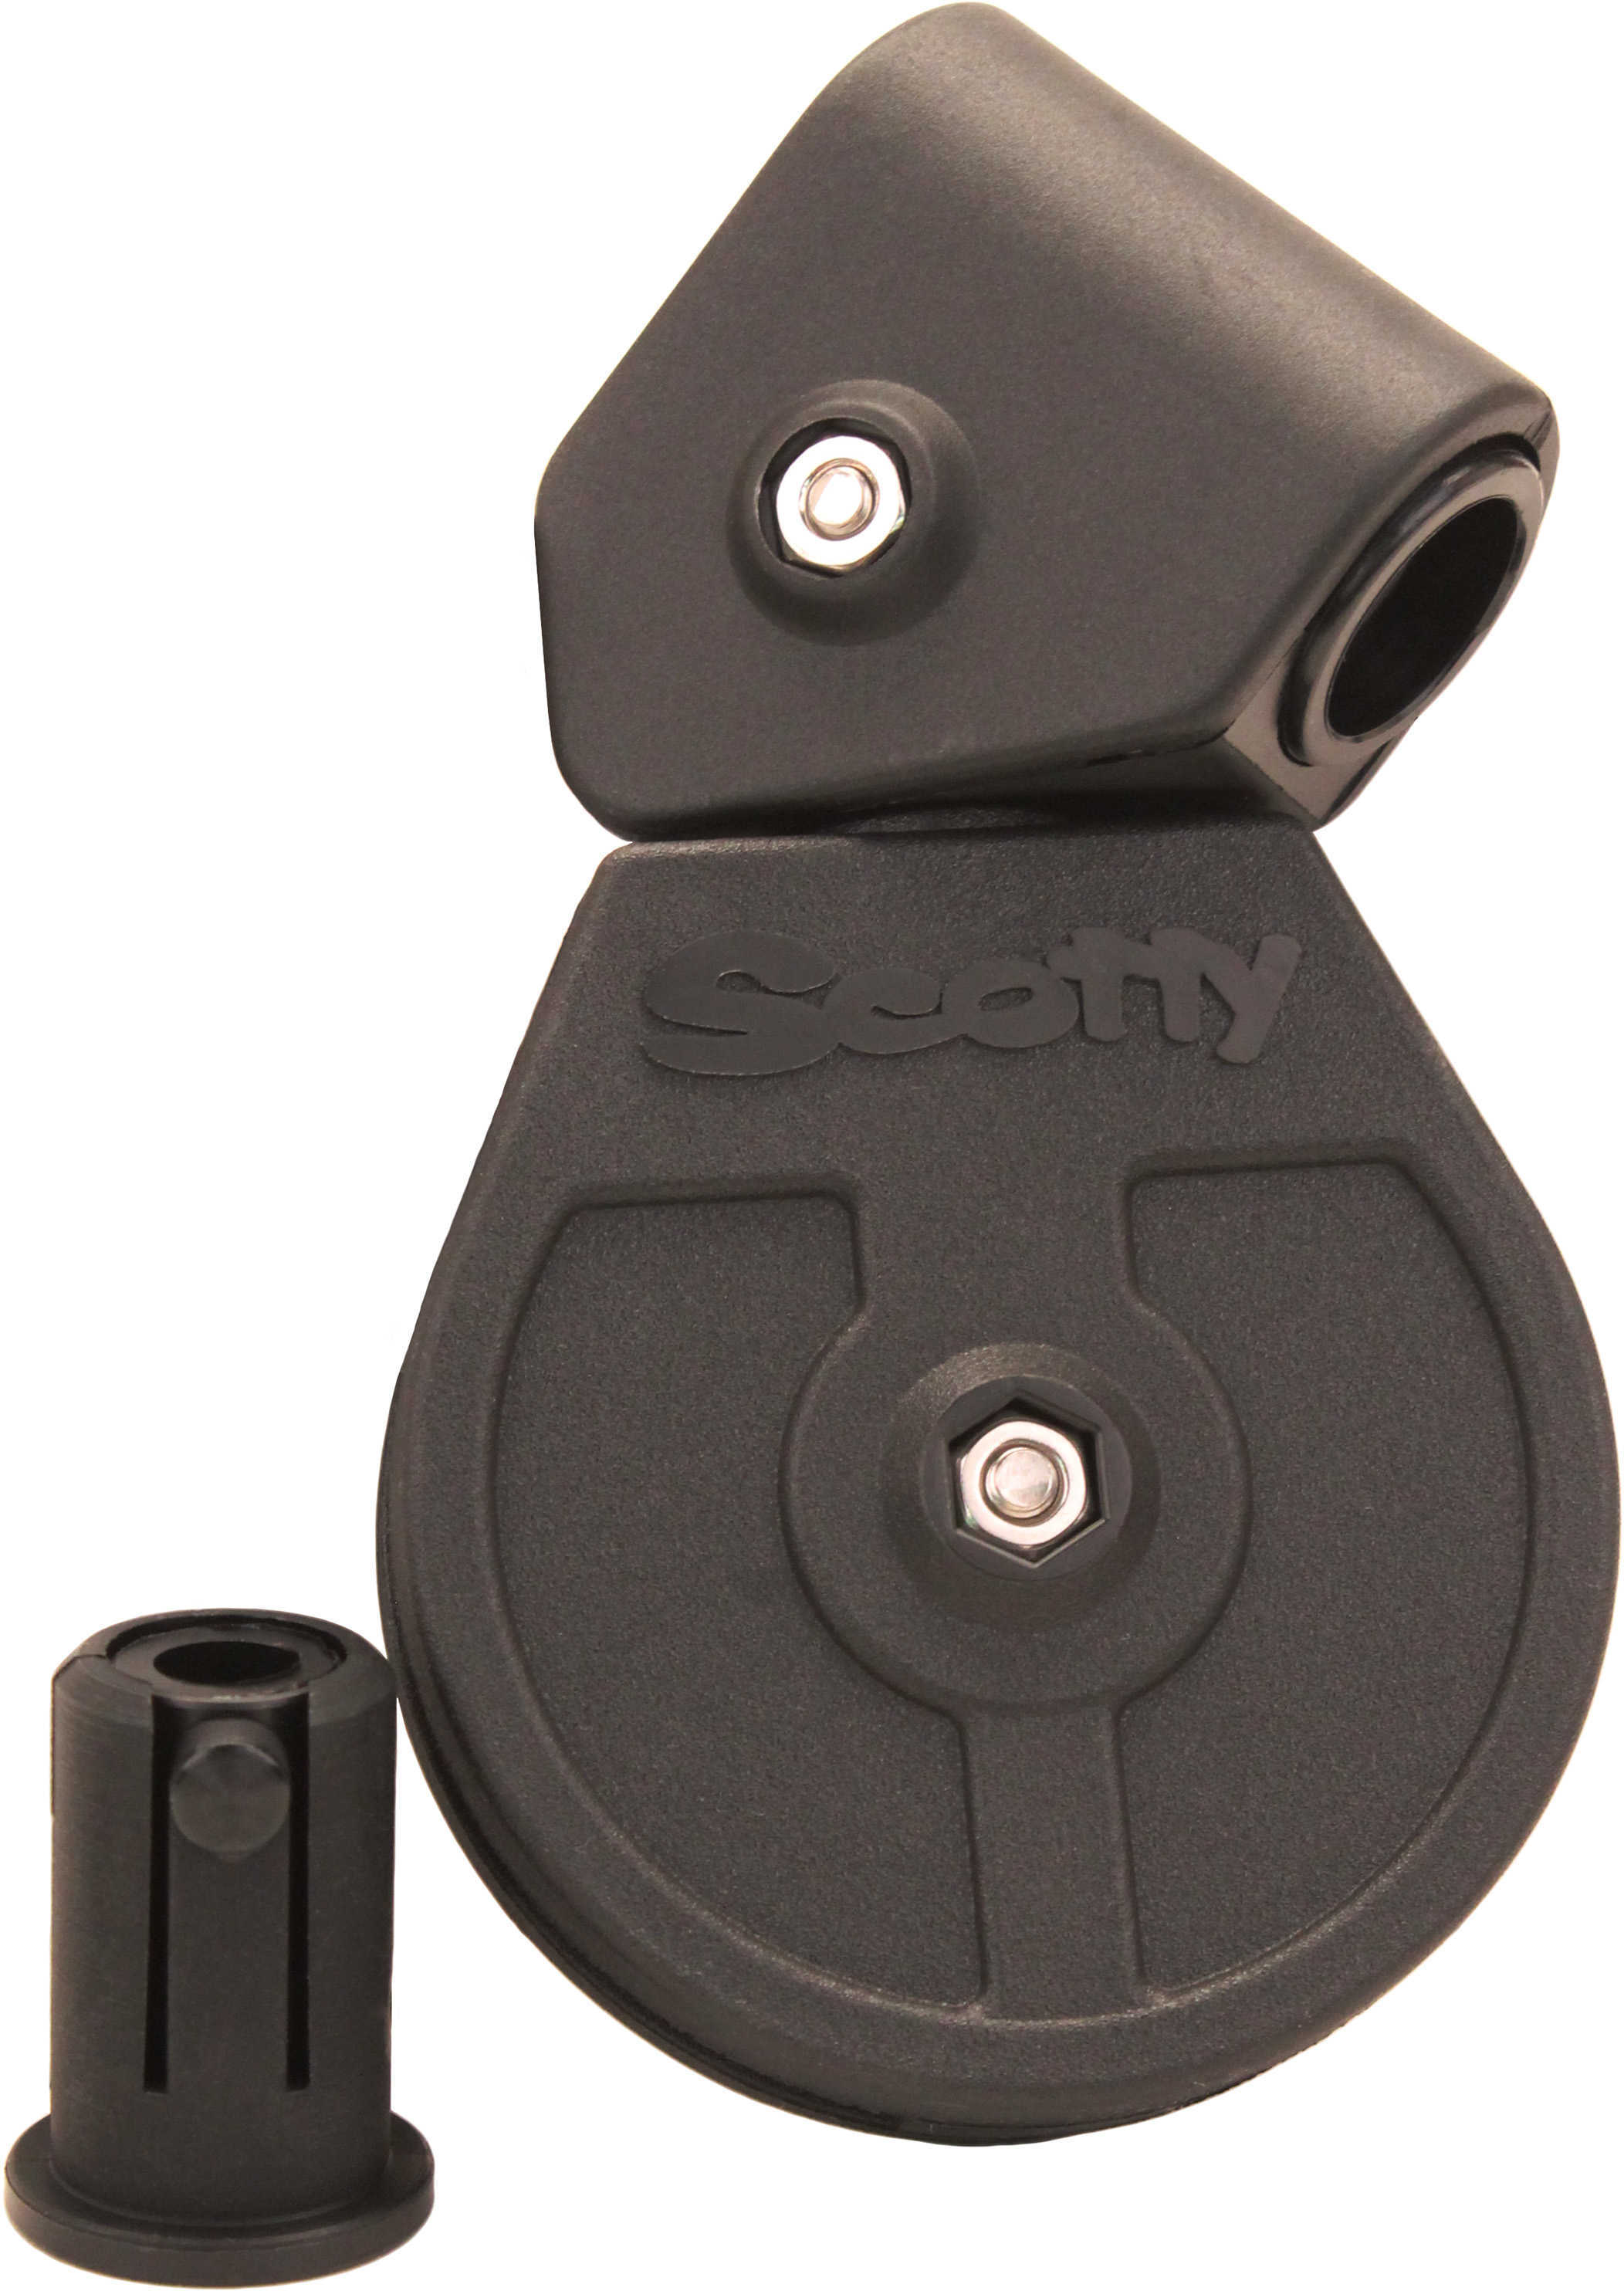 Scotty Replacement Pulley Kit for 3/4" and 1” Booms Md: 1014